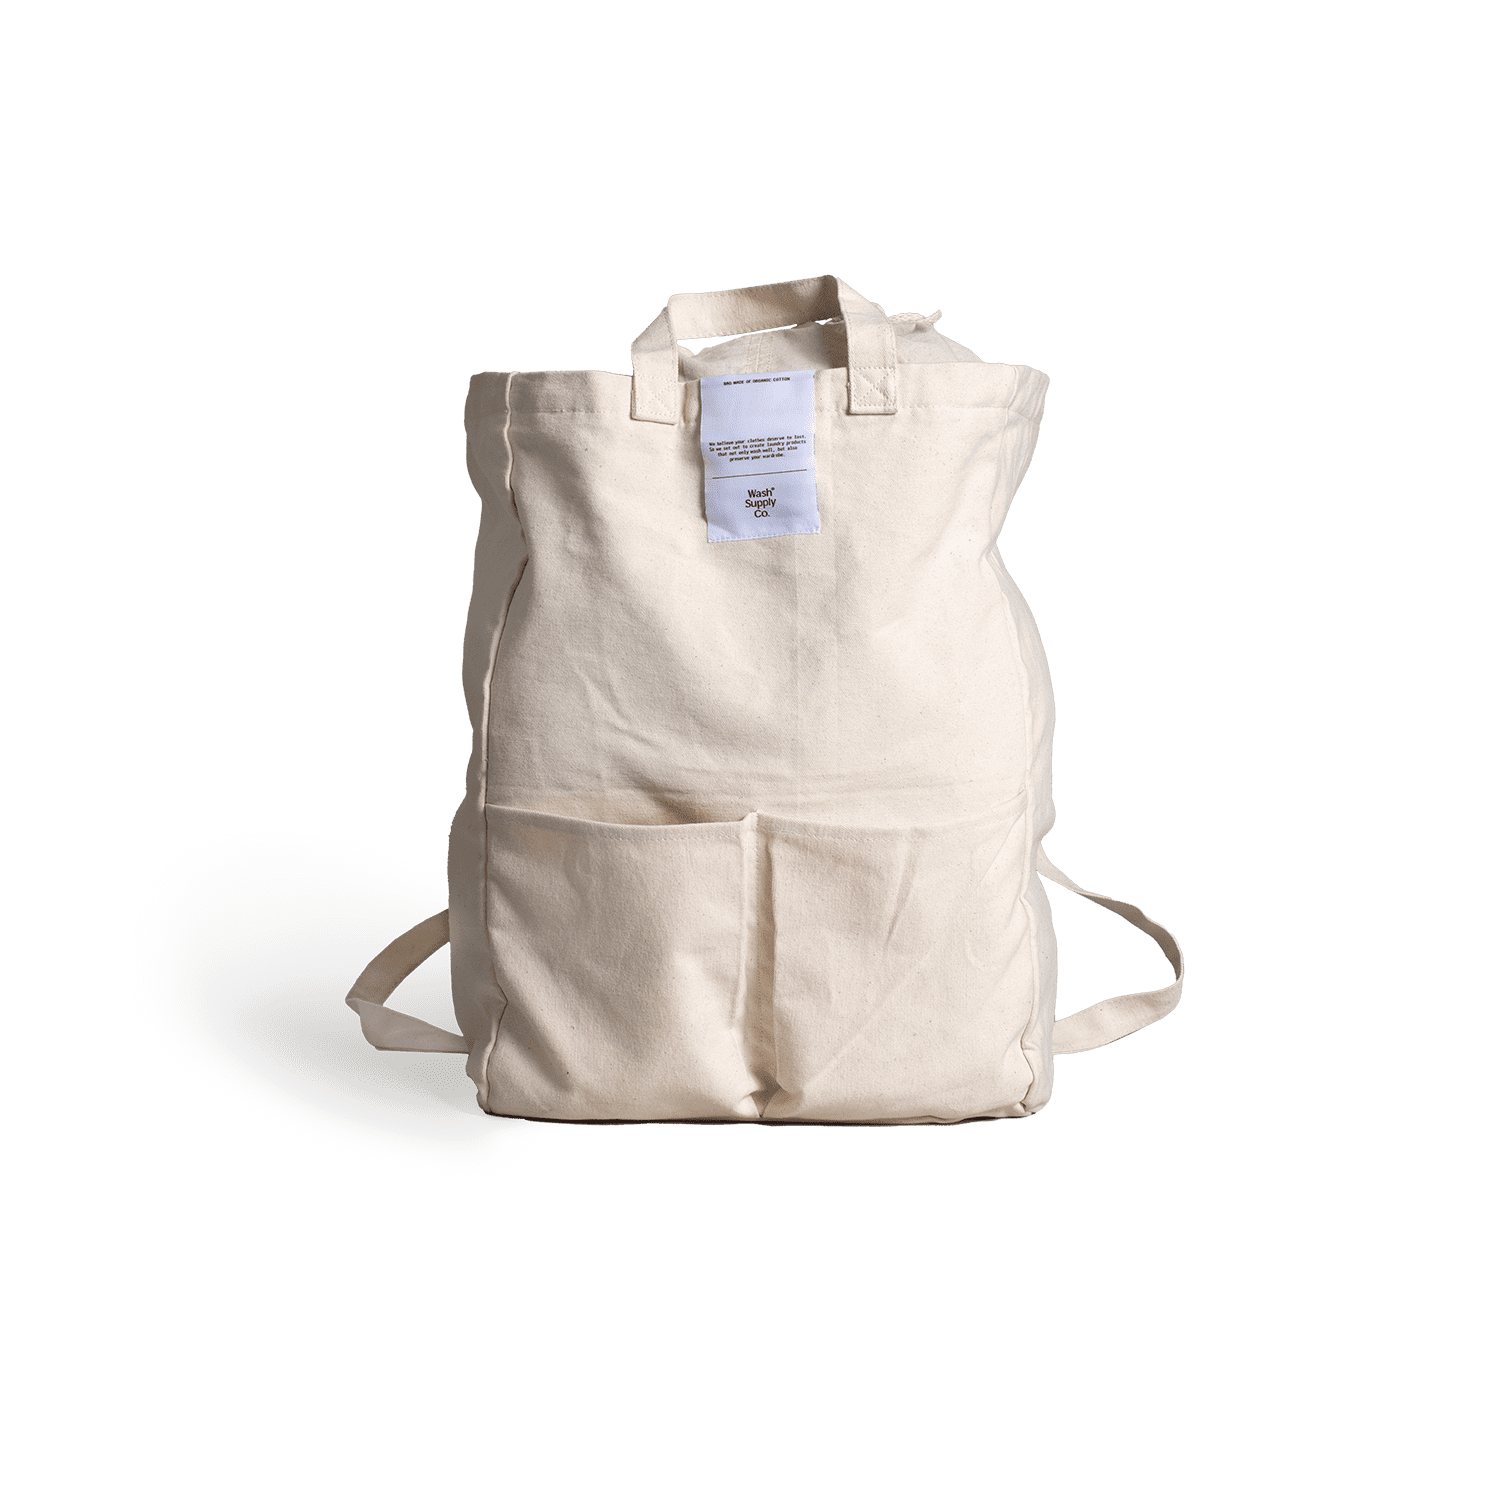 The best organic cotton bag for the beach.